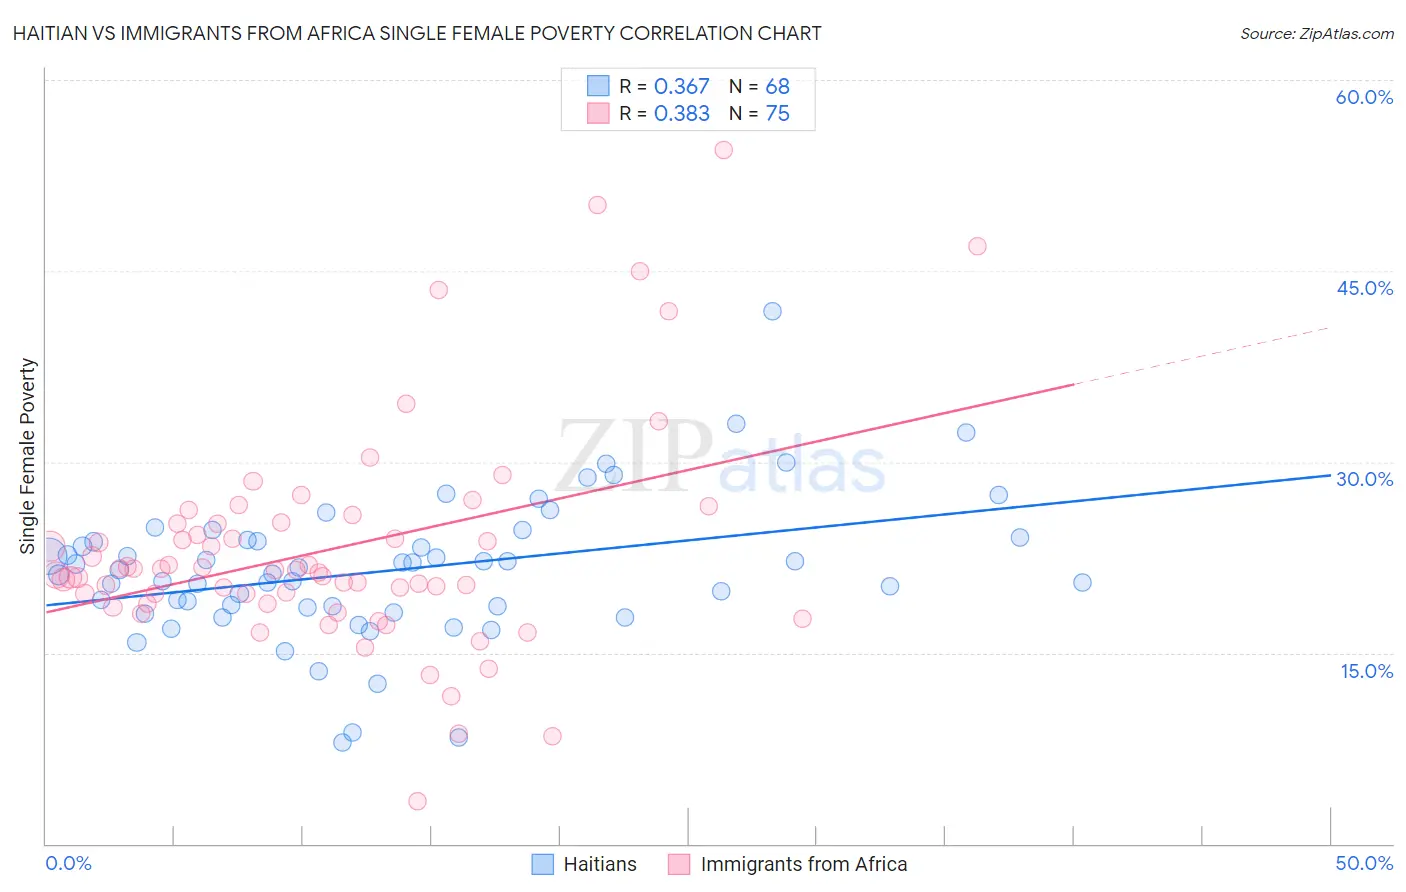 Haitian vs Immigrants from Africa Single Female Poverty